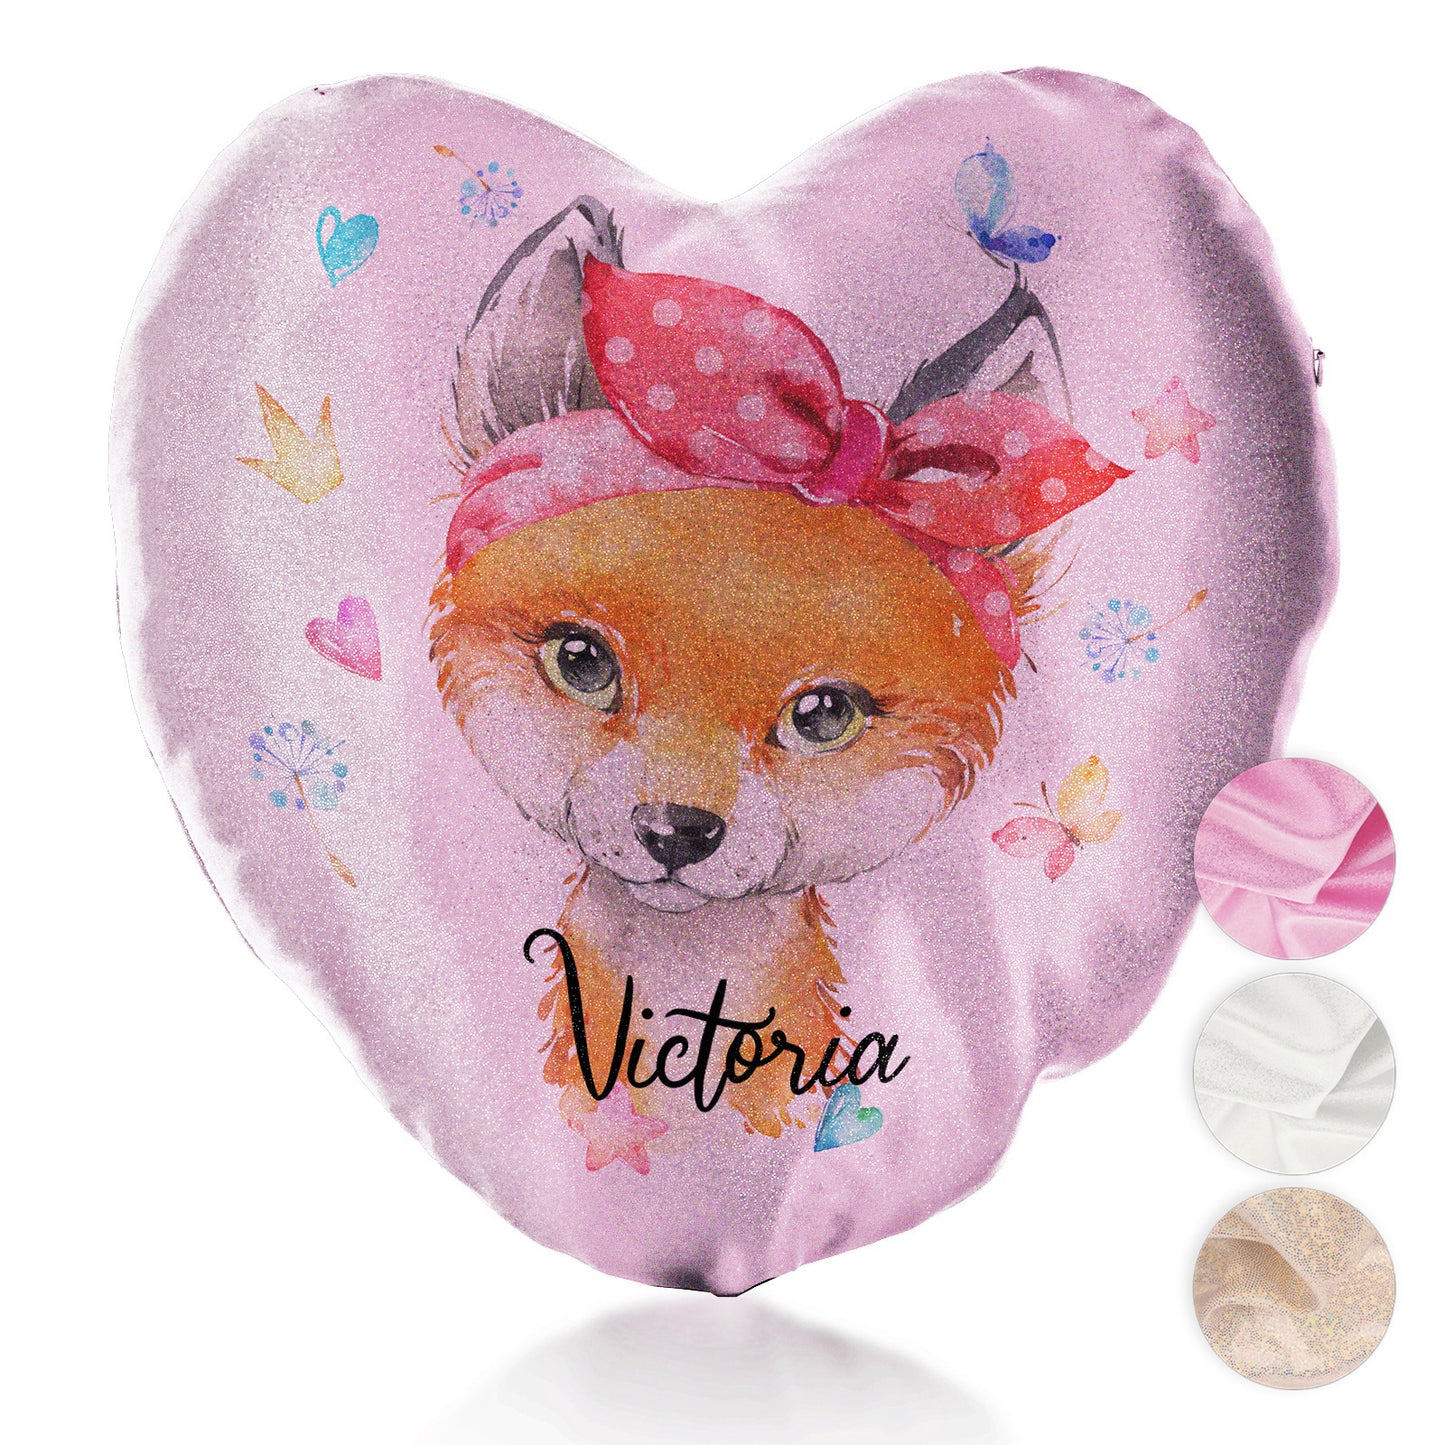 Personalised Glitter Heart Cushion with Red Fox with Hearts Dandelion Butterflies and Cute Text